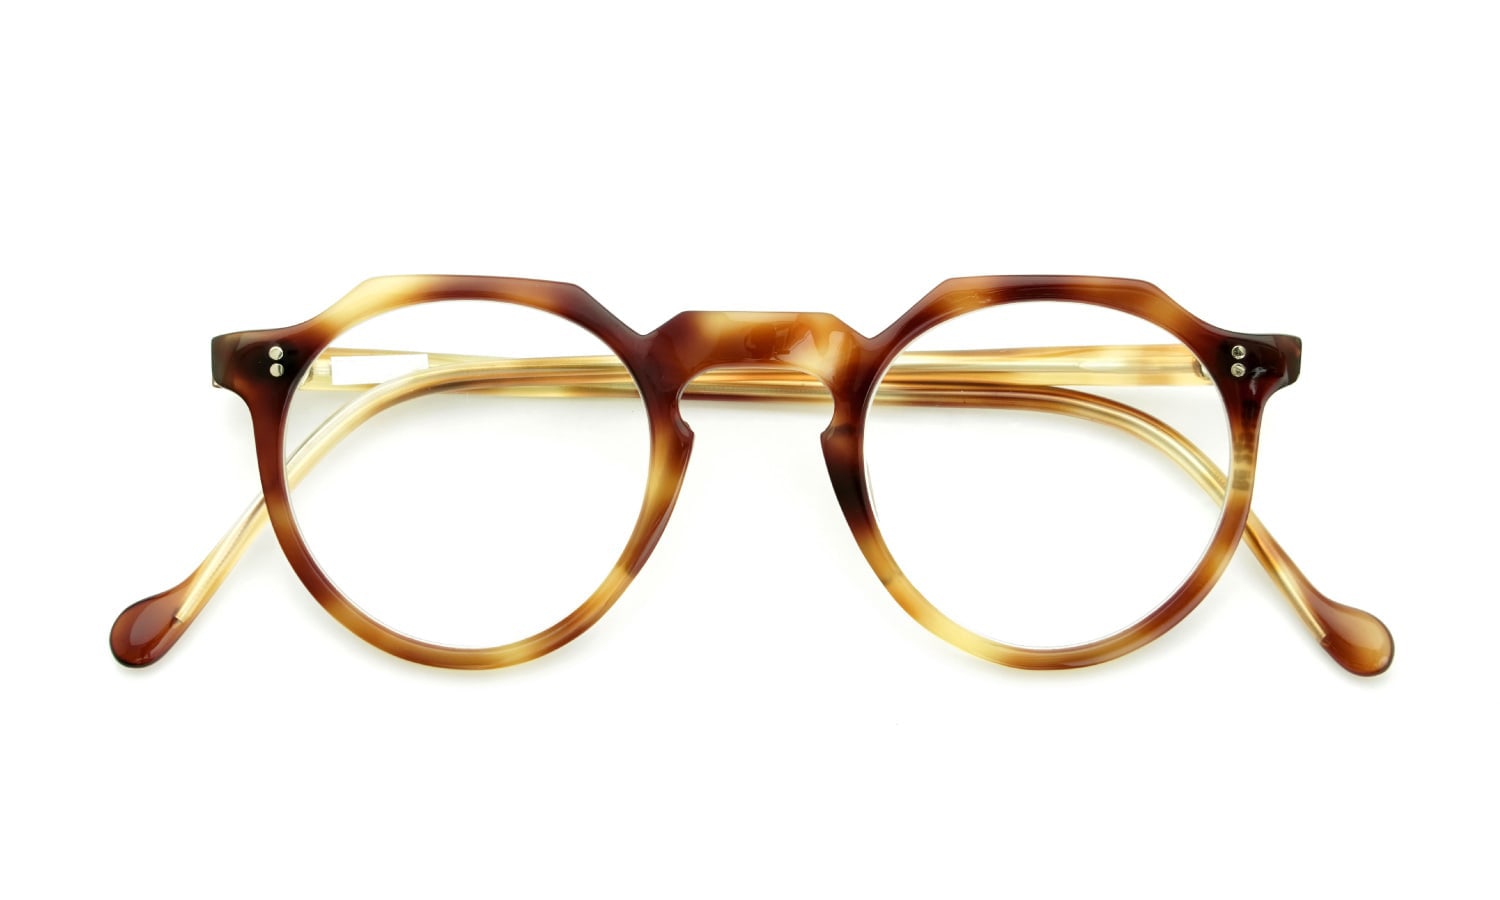 The Spectacle Frame France メガネ